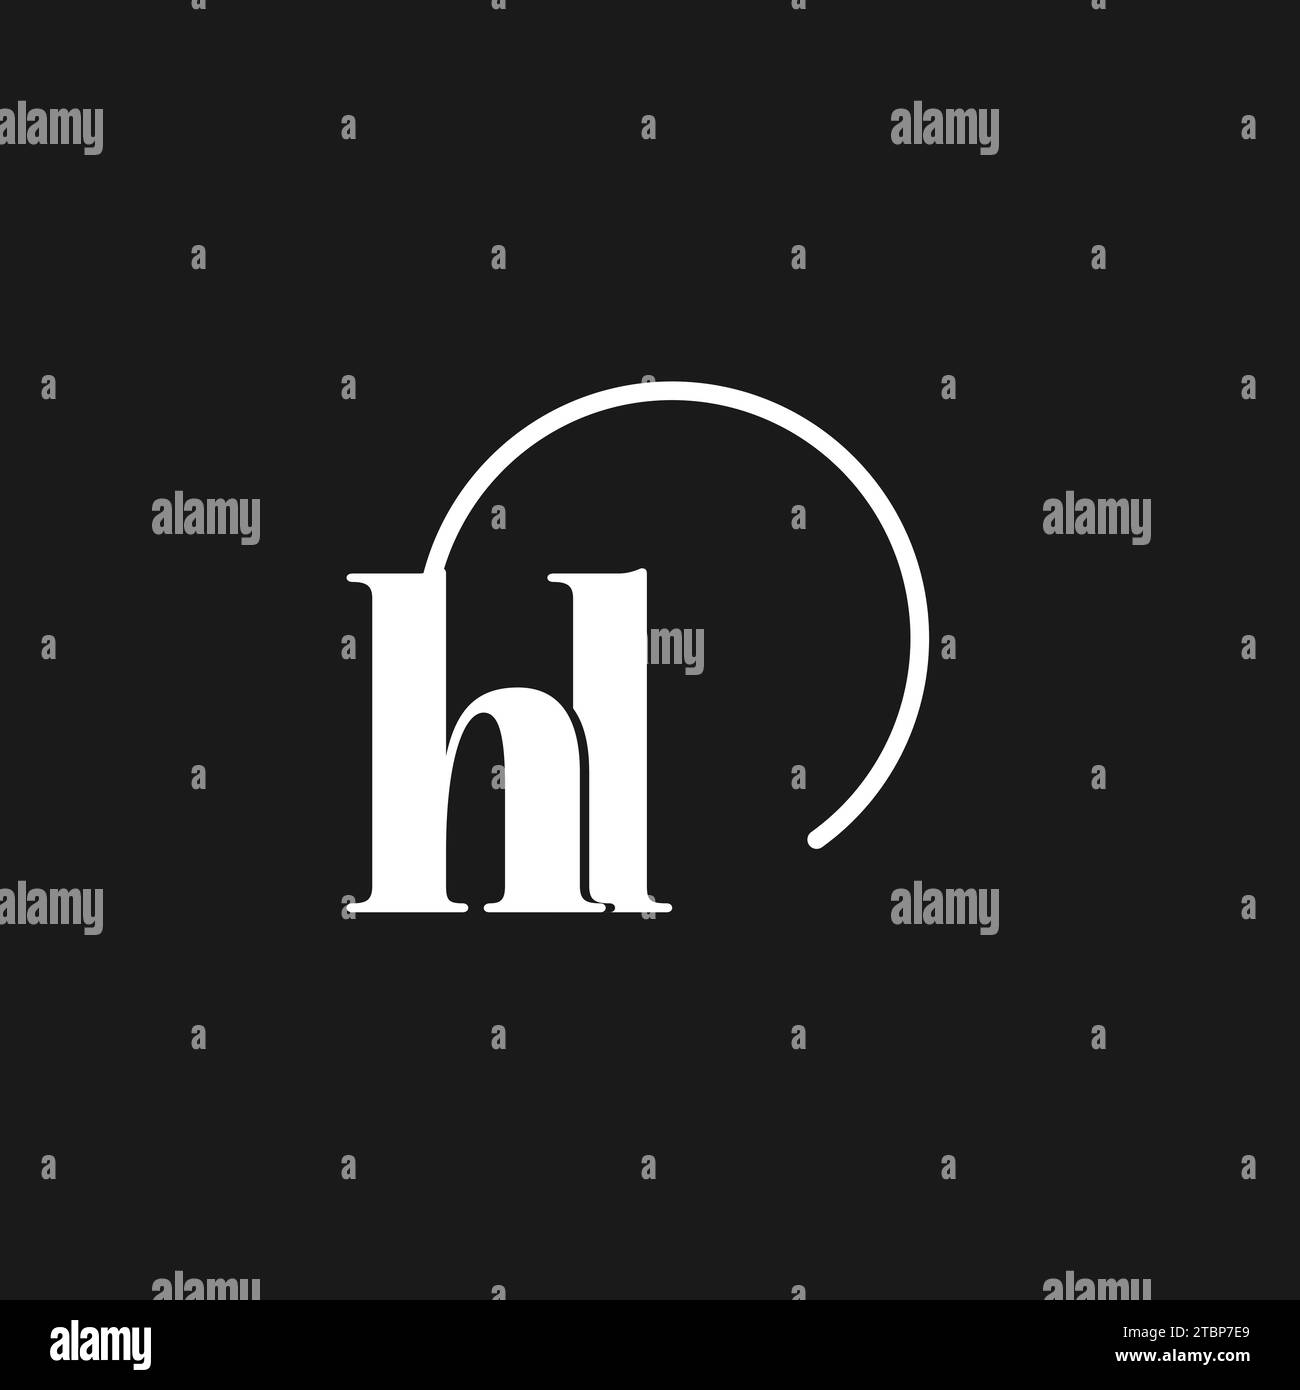 HL logo initials monogram with circular lines, minimalist and clean logo design, simple but classy style vector graphic Stock Vector